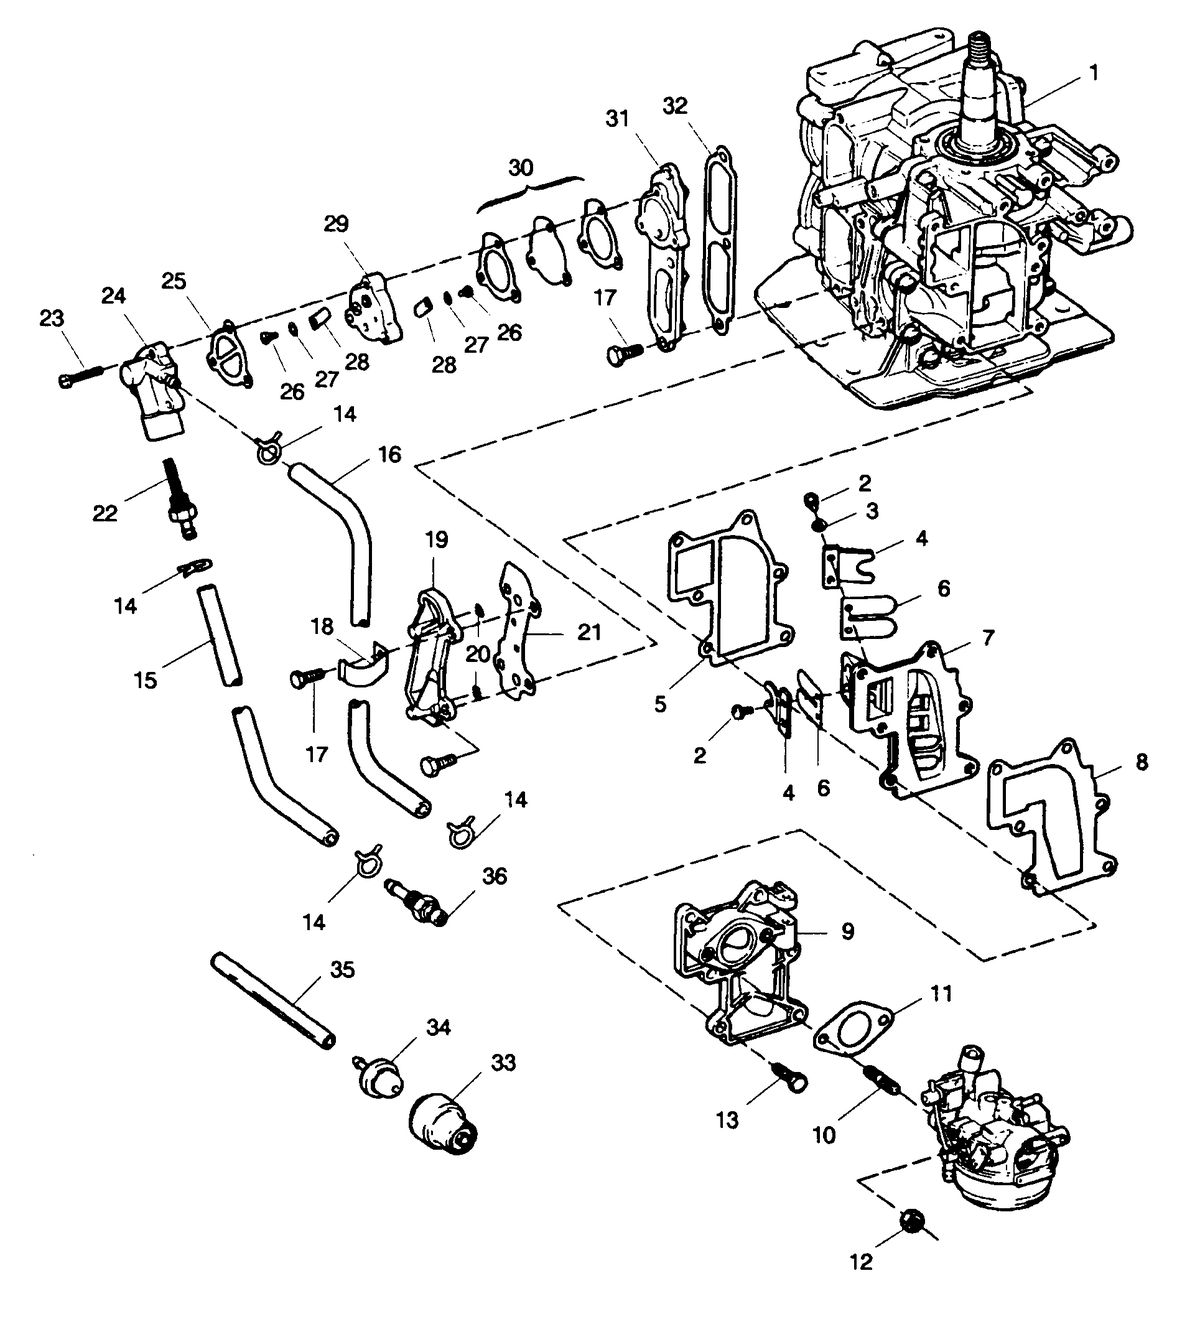 SEARS SEARS 15 H.P. FUEL INTAKE AND RECIRCULATION SYSTEM